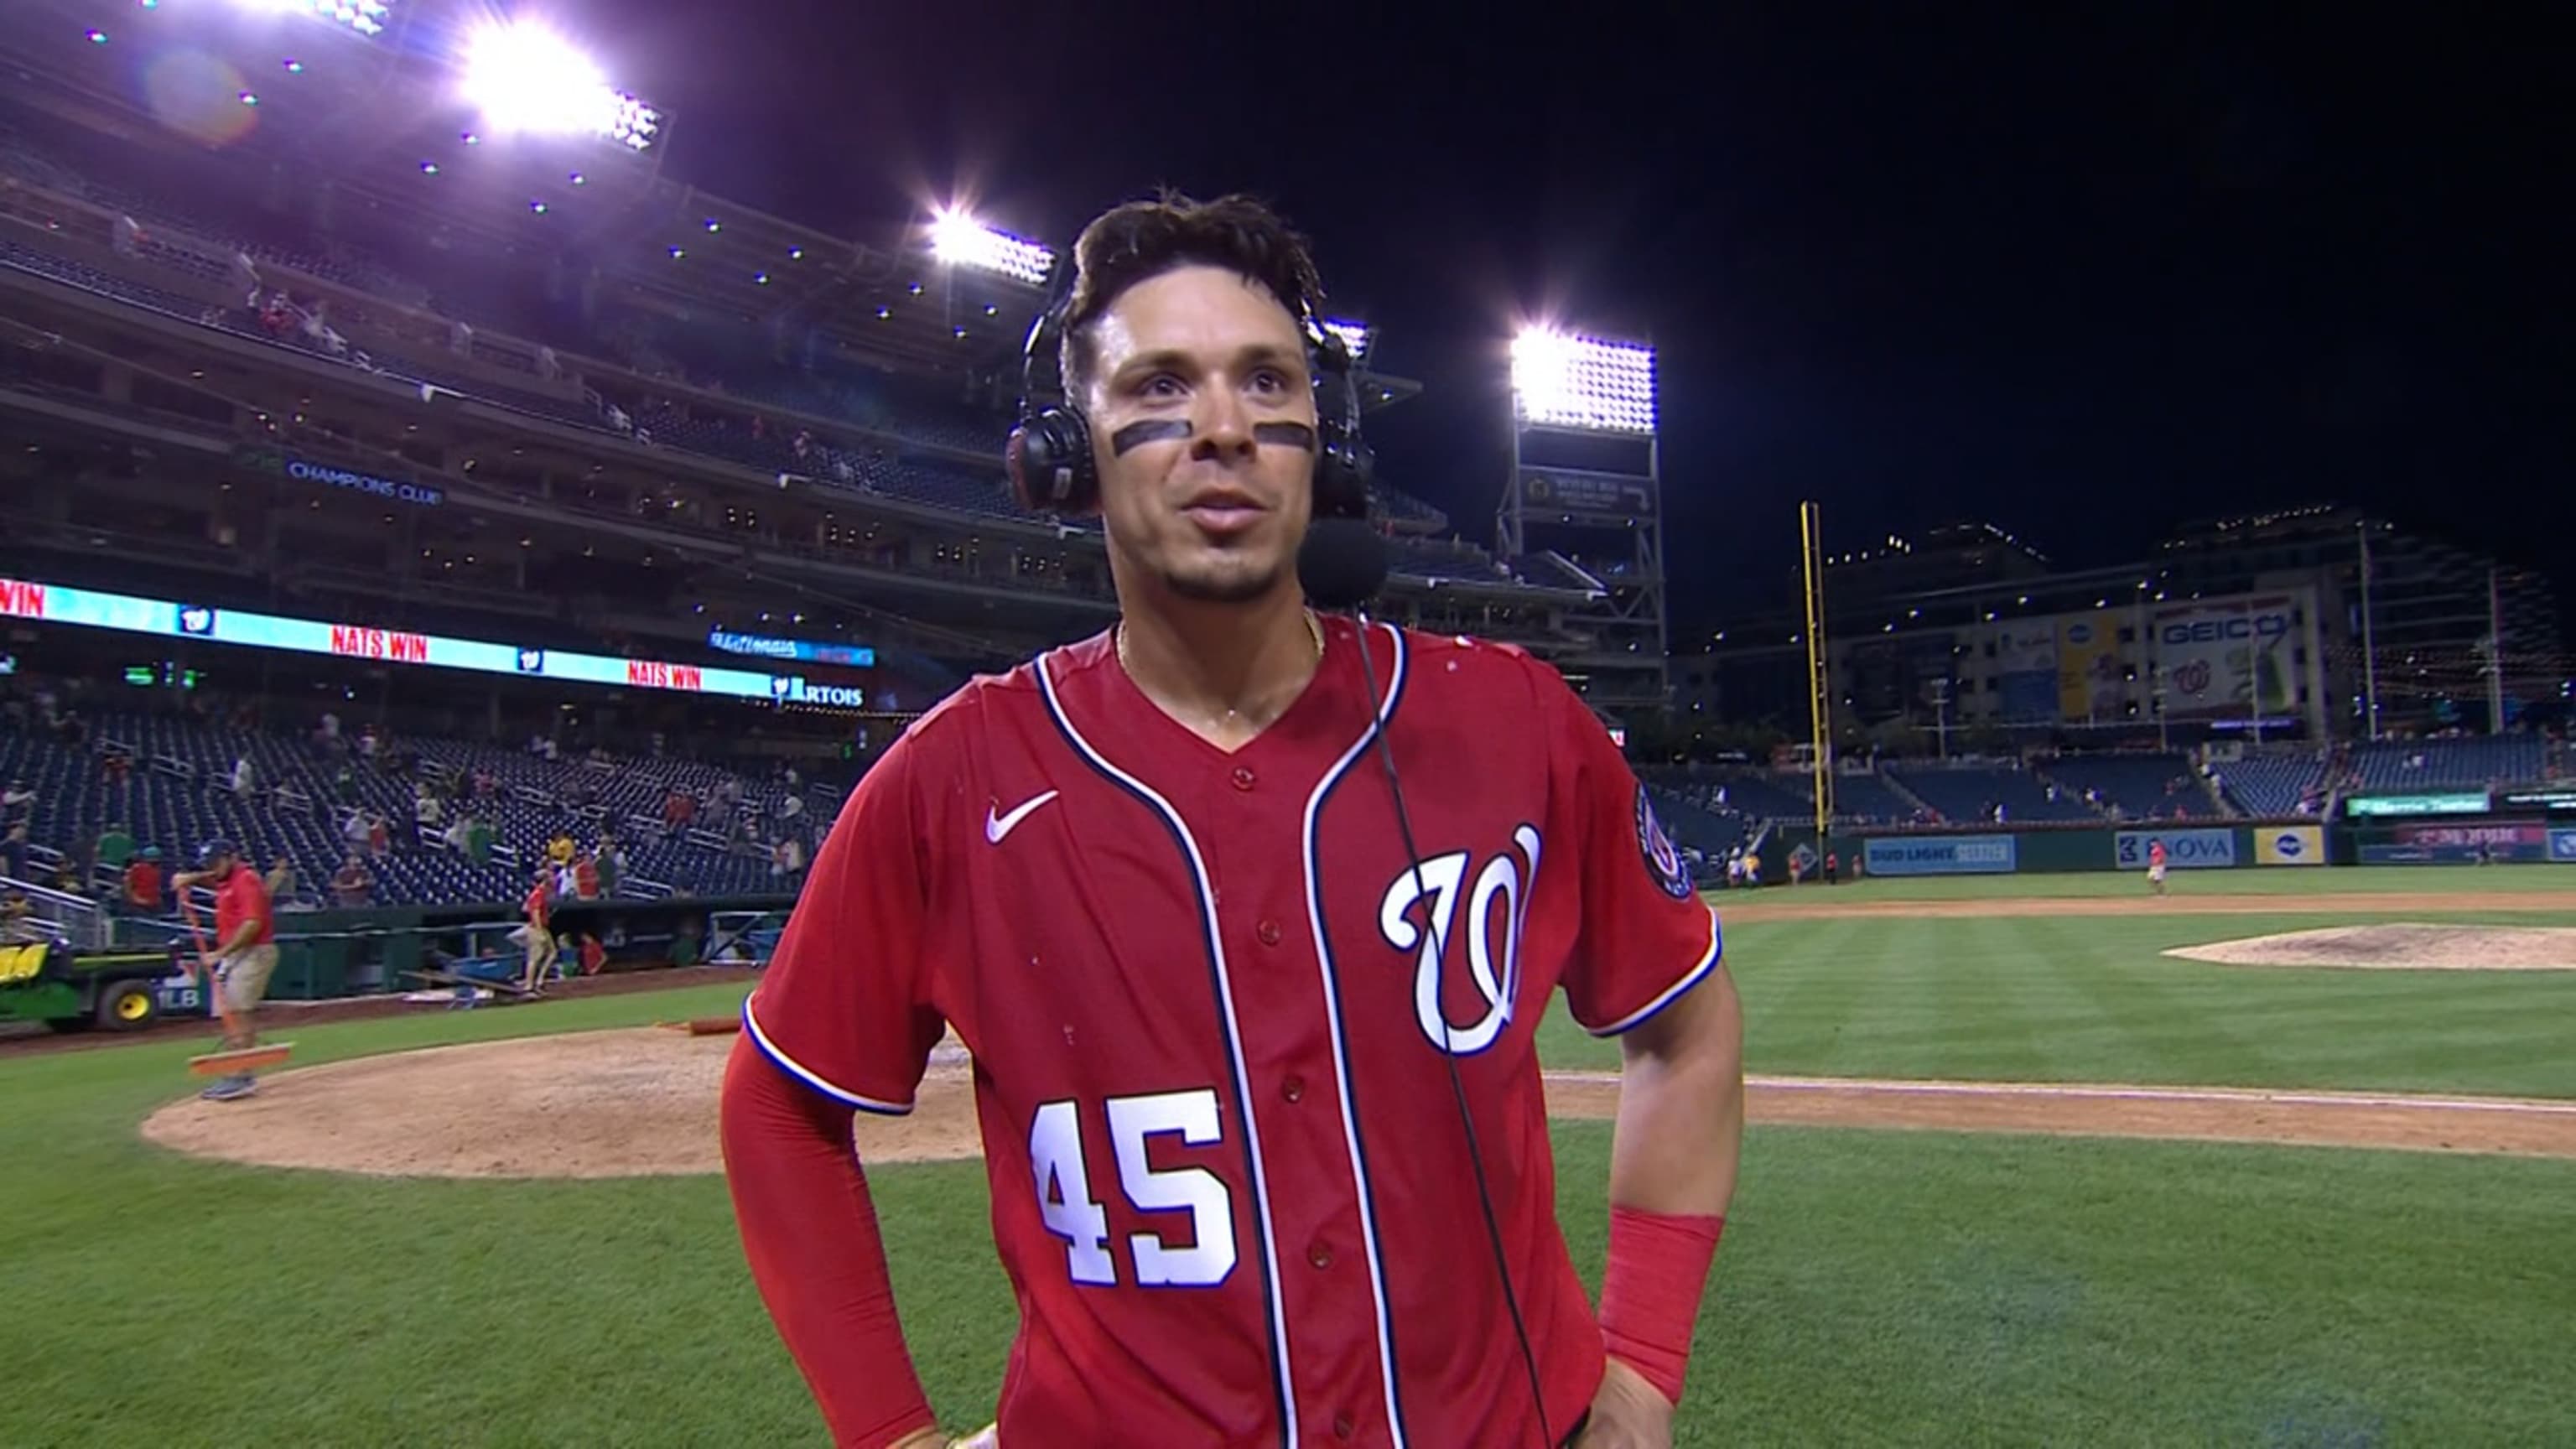 Joey Meneses homers, drives in 3 runs as the Nationals rally past the  Brewers 5-3 - ABC News